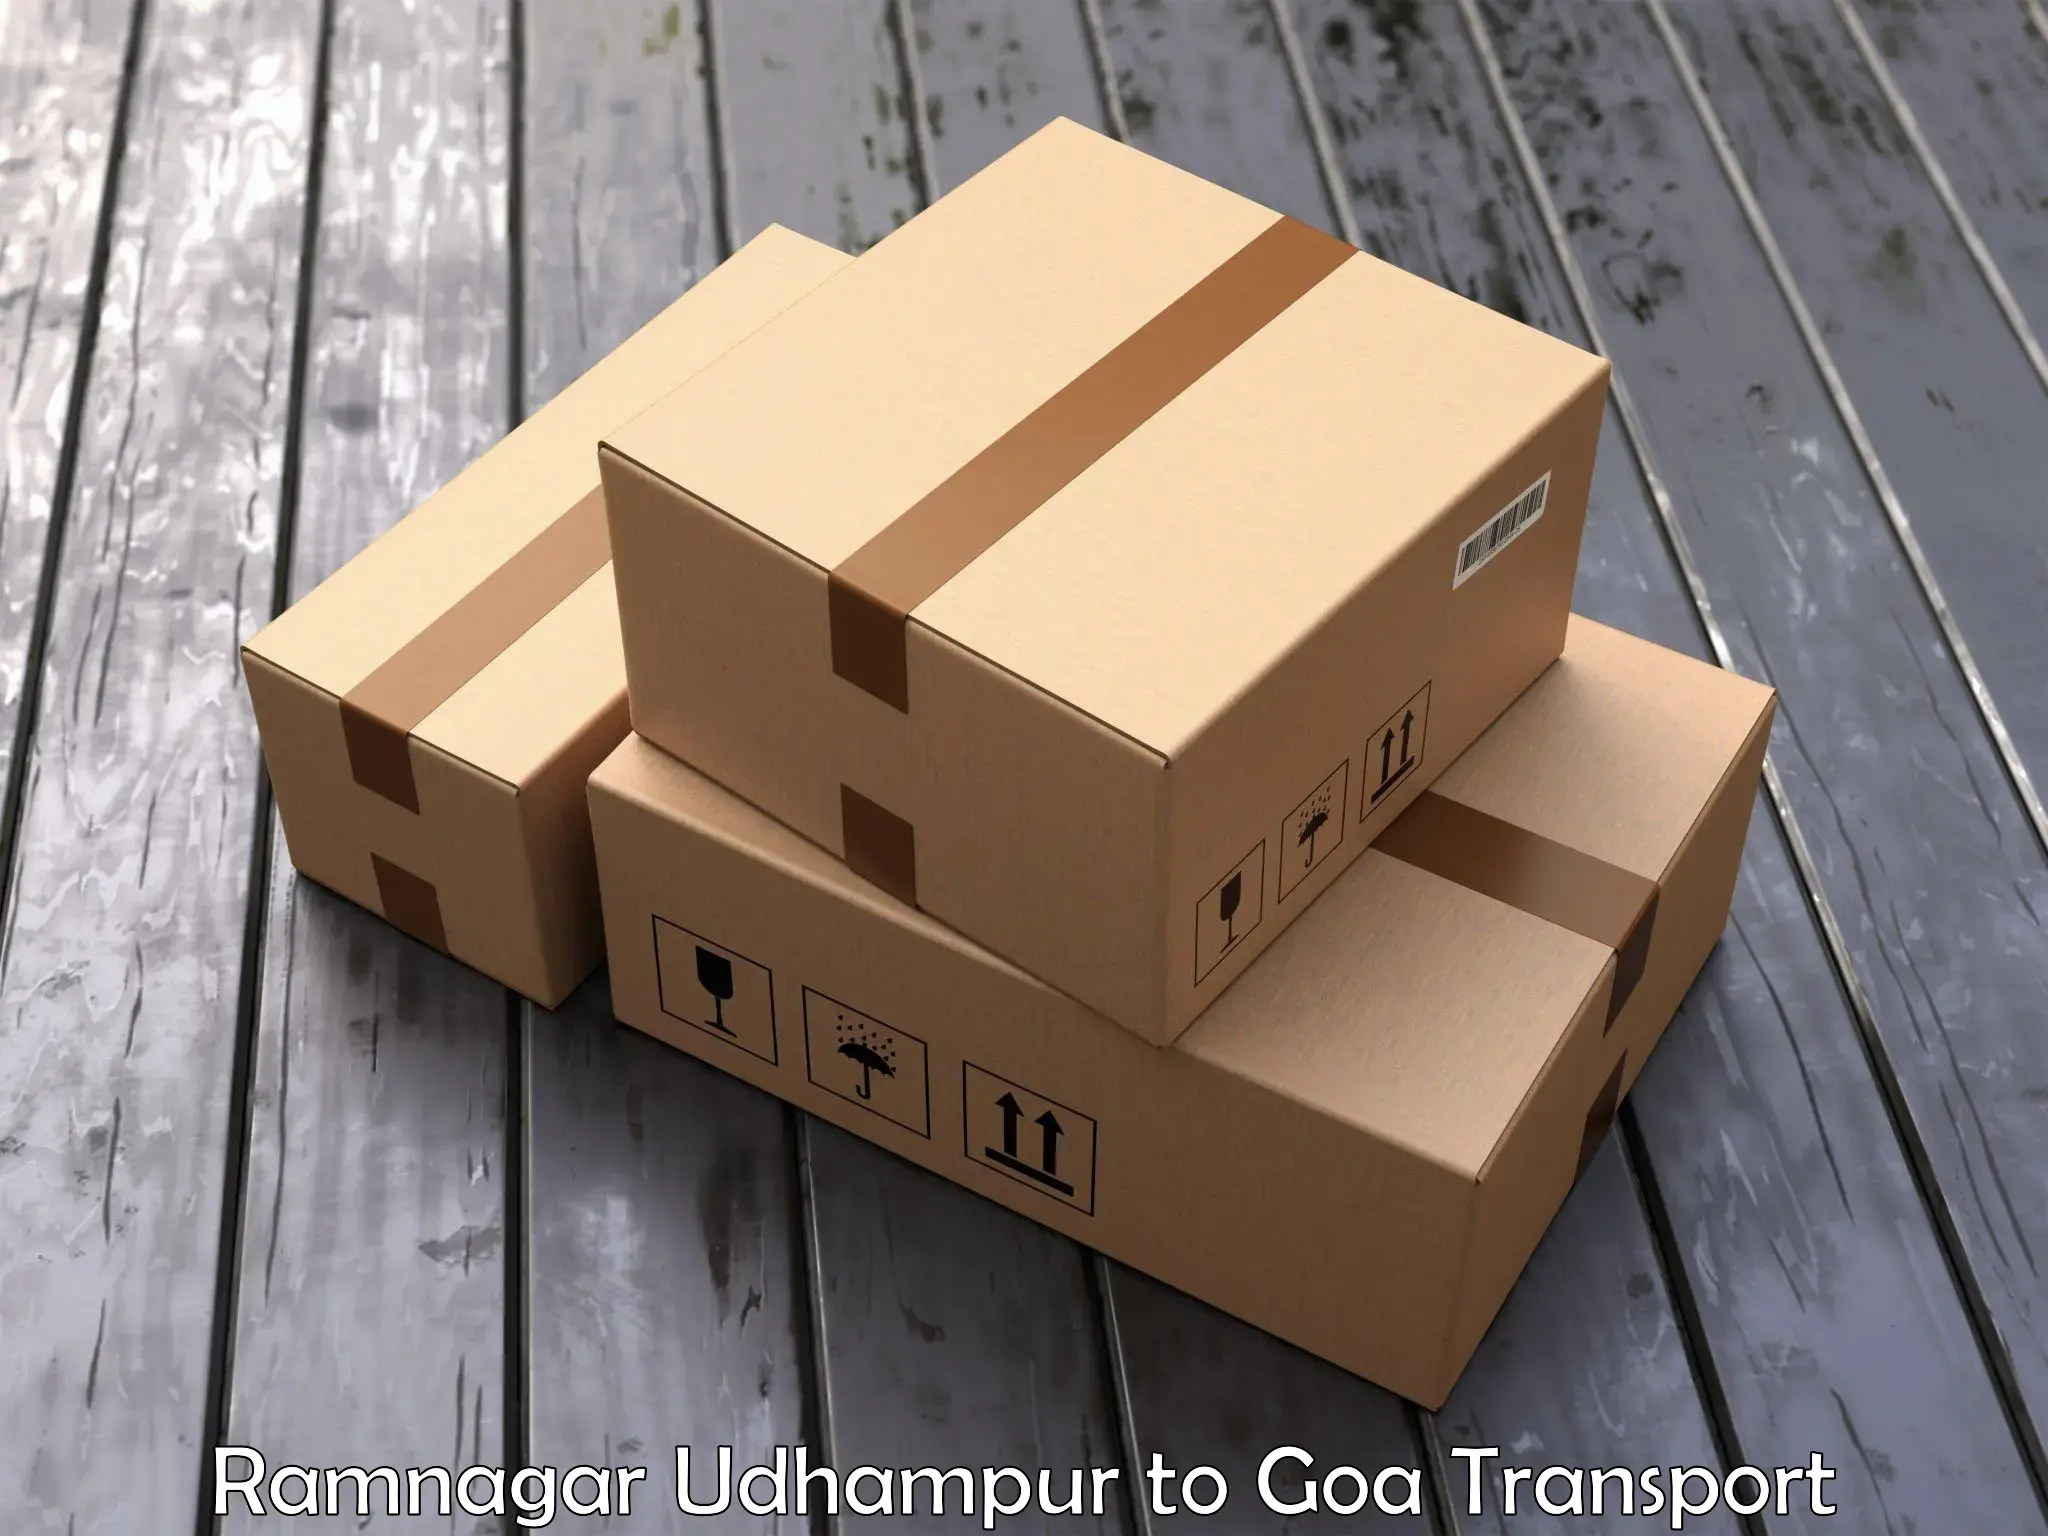 Daily parcel service transport in Ramnagar Udhampur to Goa University